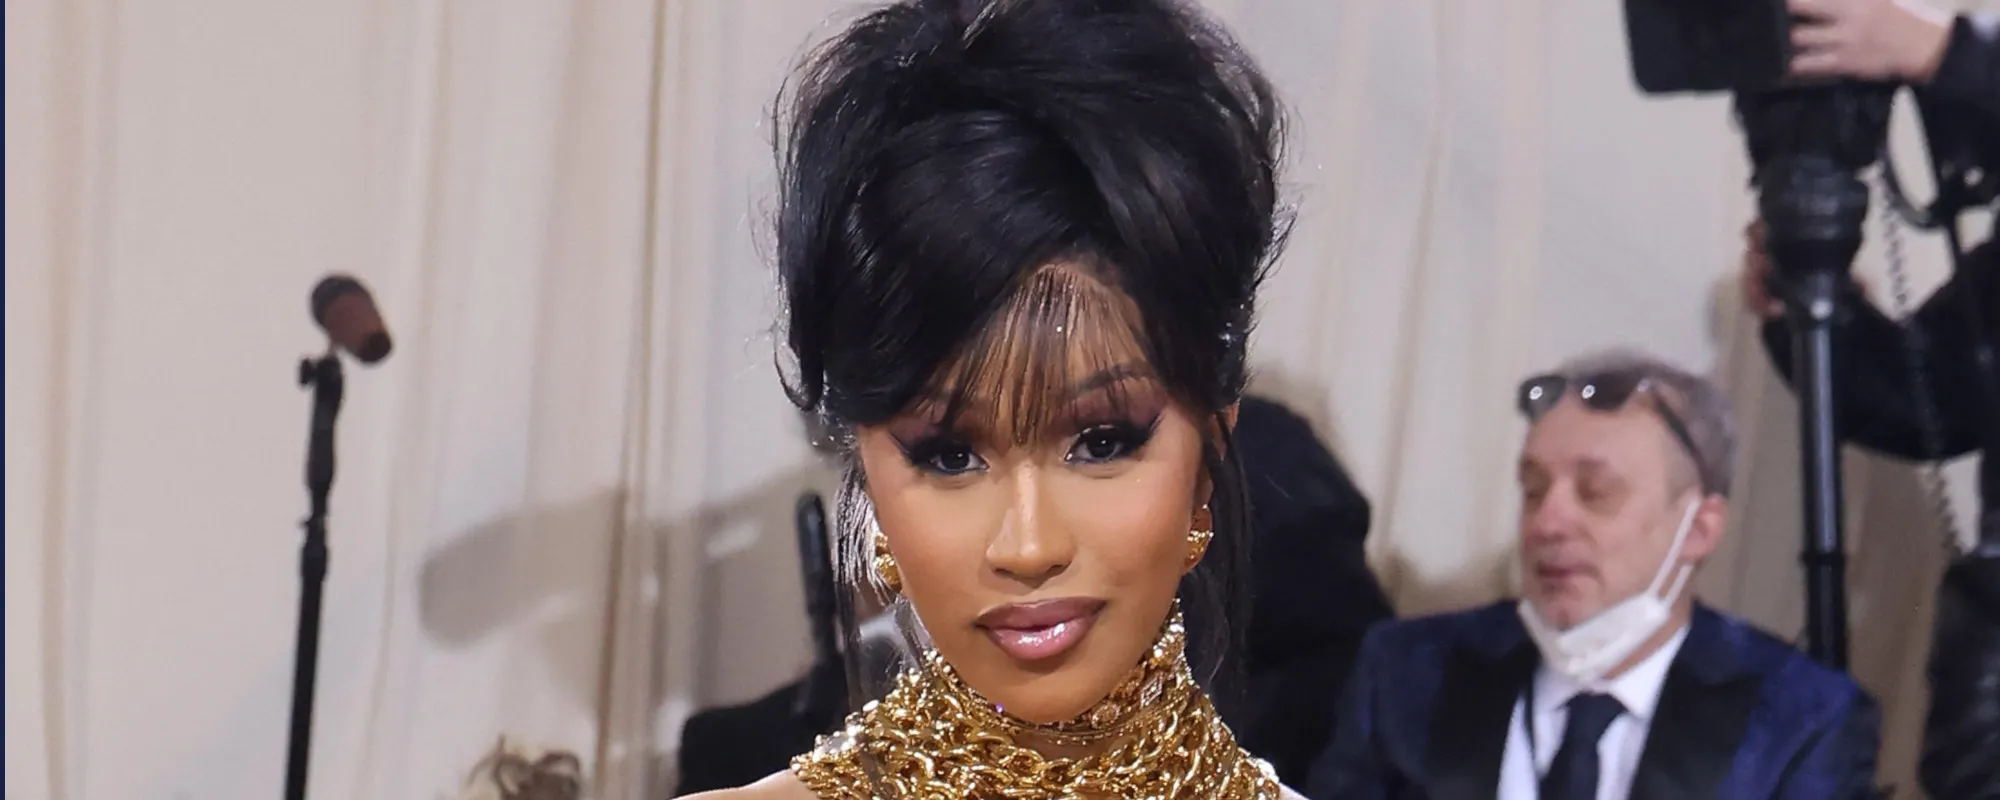 Cardi B Hit with Battery Allegations after Launching Water Bottle at Fan